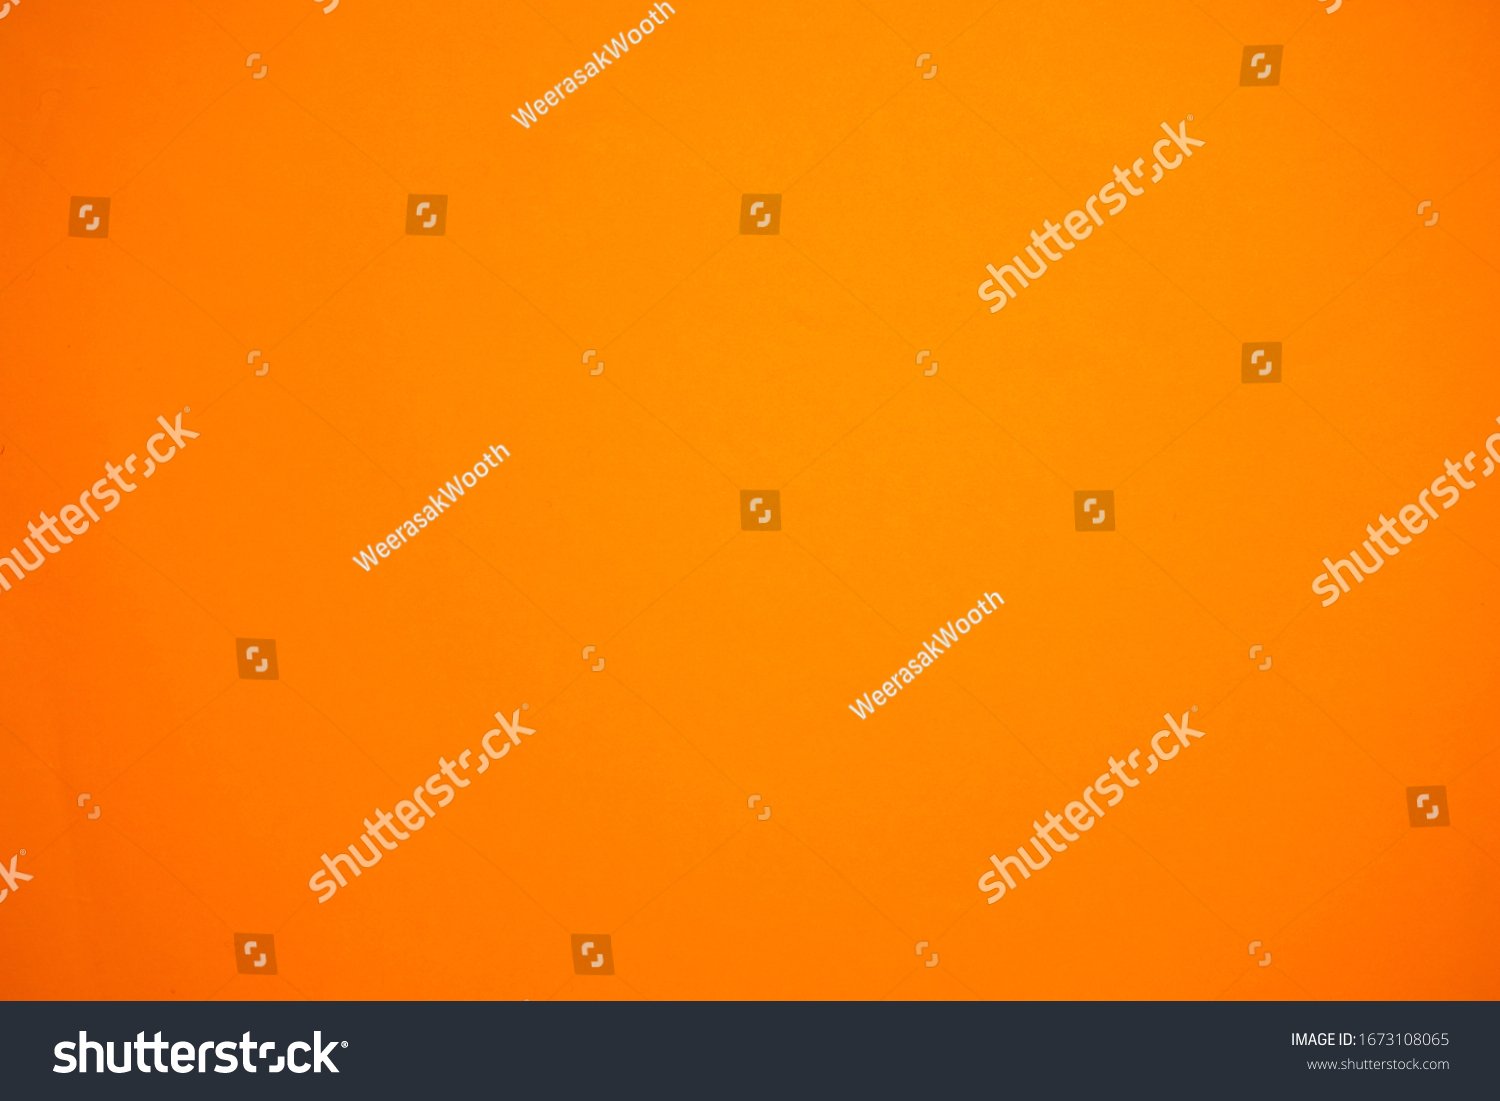 abstract background with surface of orange paper for background ,vintage style. #1673108065